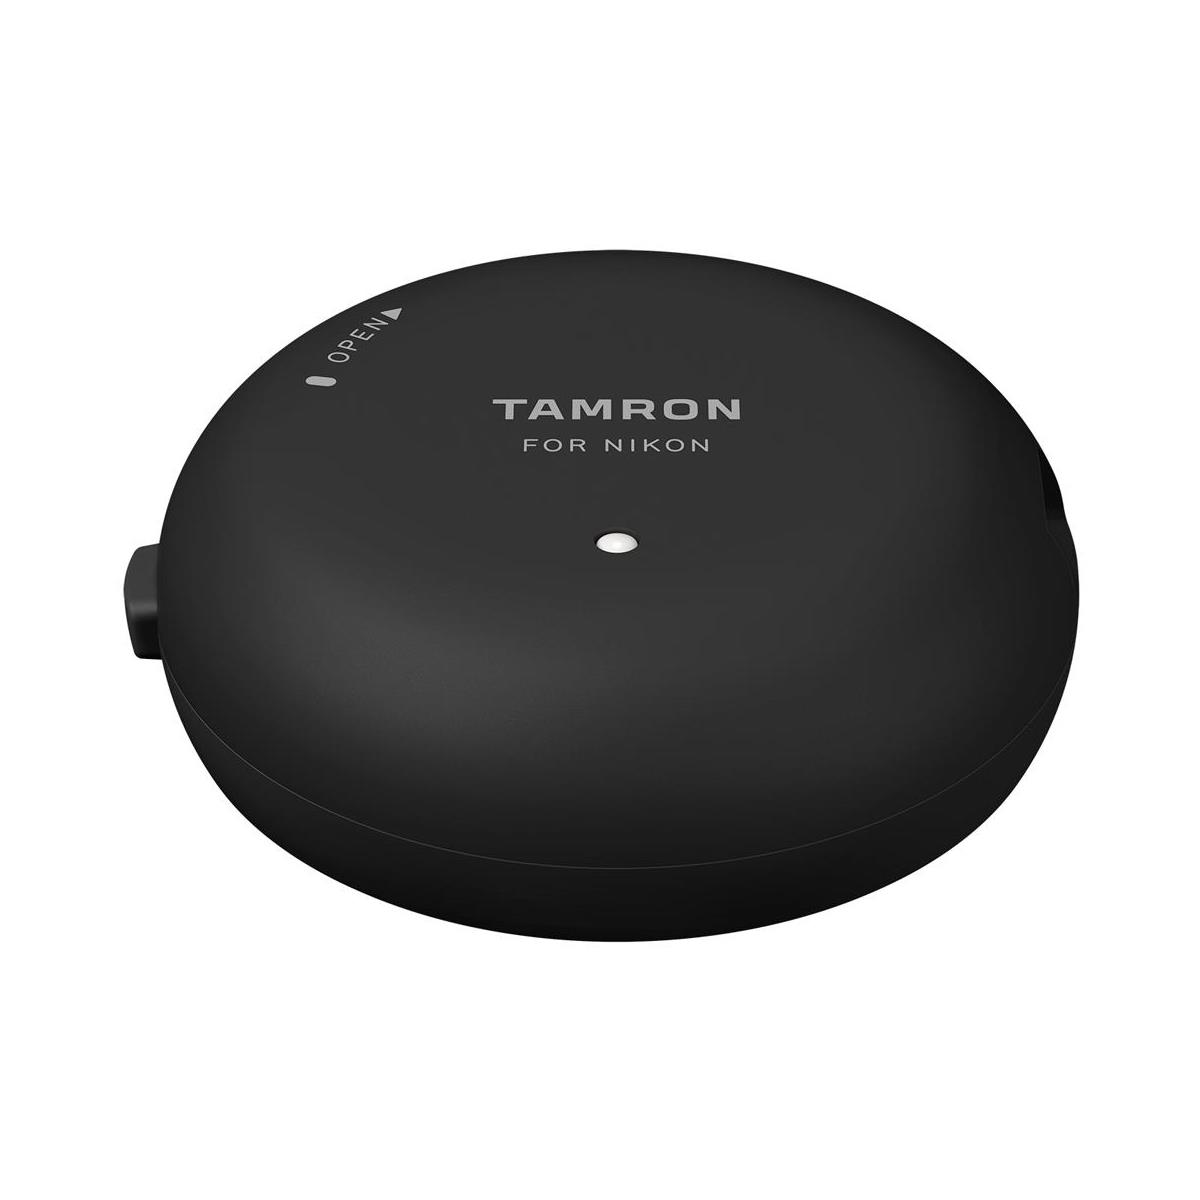 Image of TV Logic Tamron TAP-In Console for Nikon F-Mount Lenses